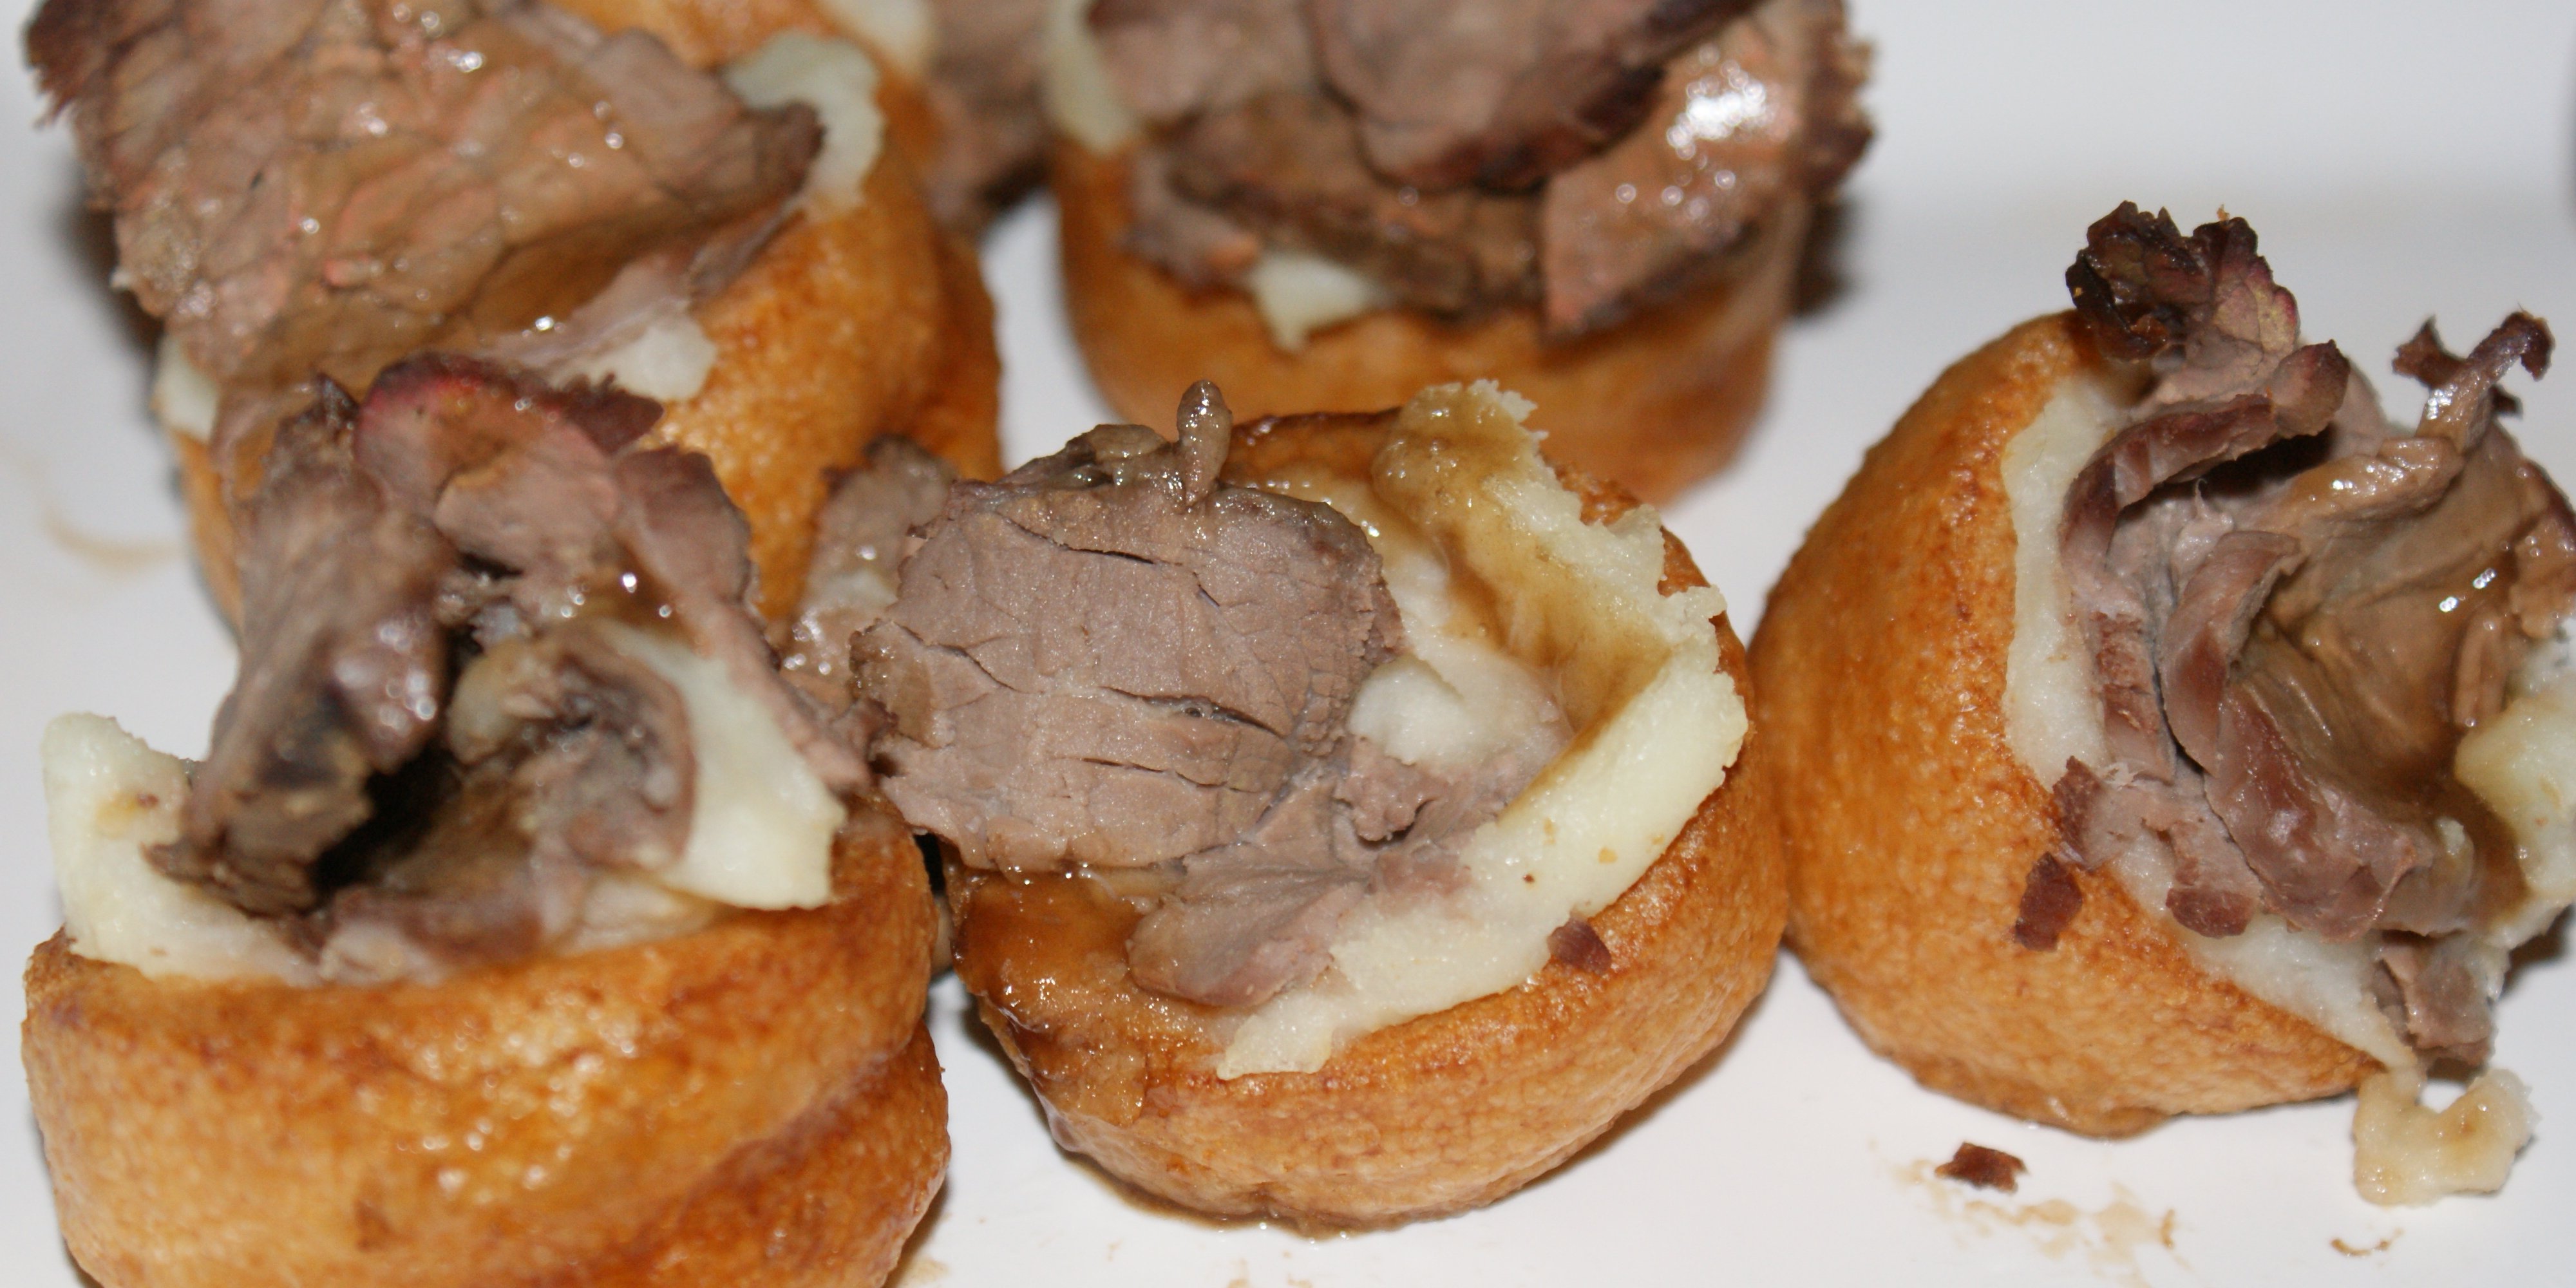 Mini yorkshire puddings with rare roast beef & horseraddish mash
	 Finger Food for the epicure